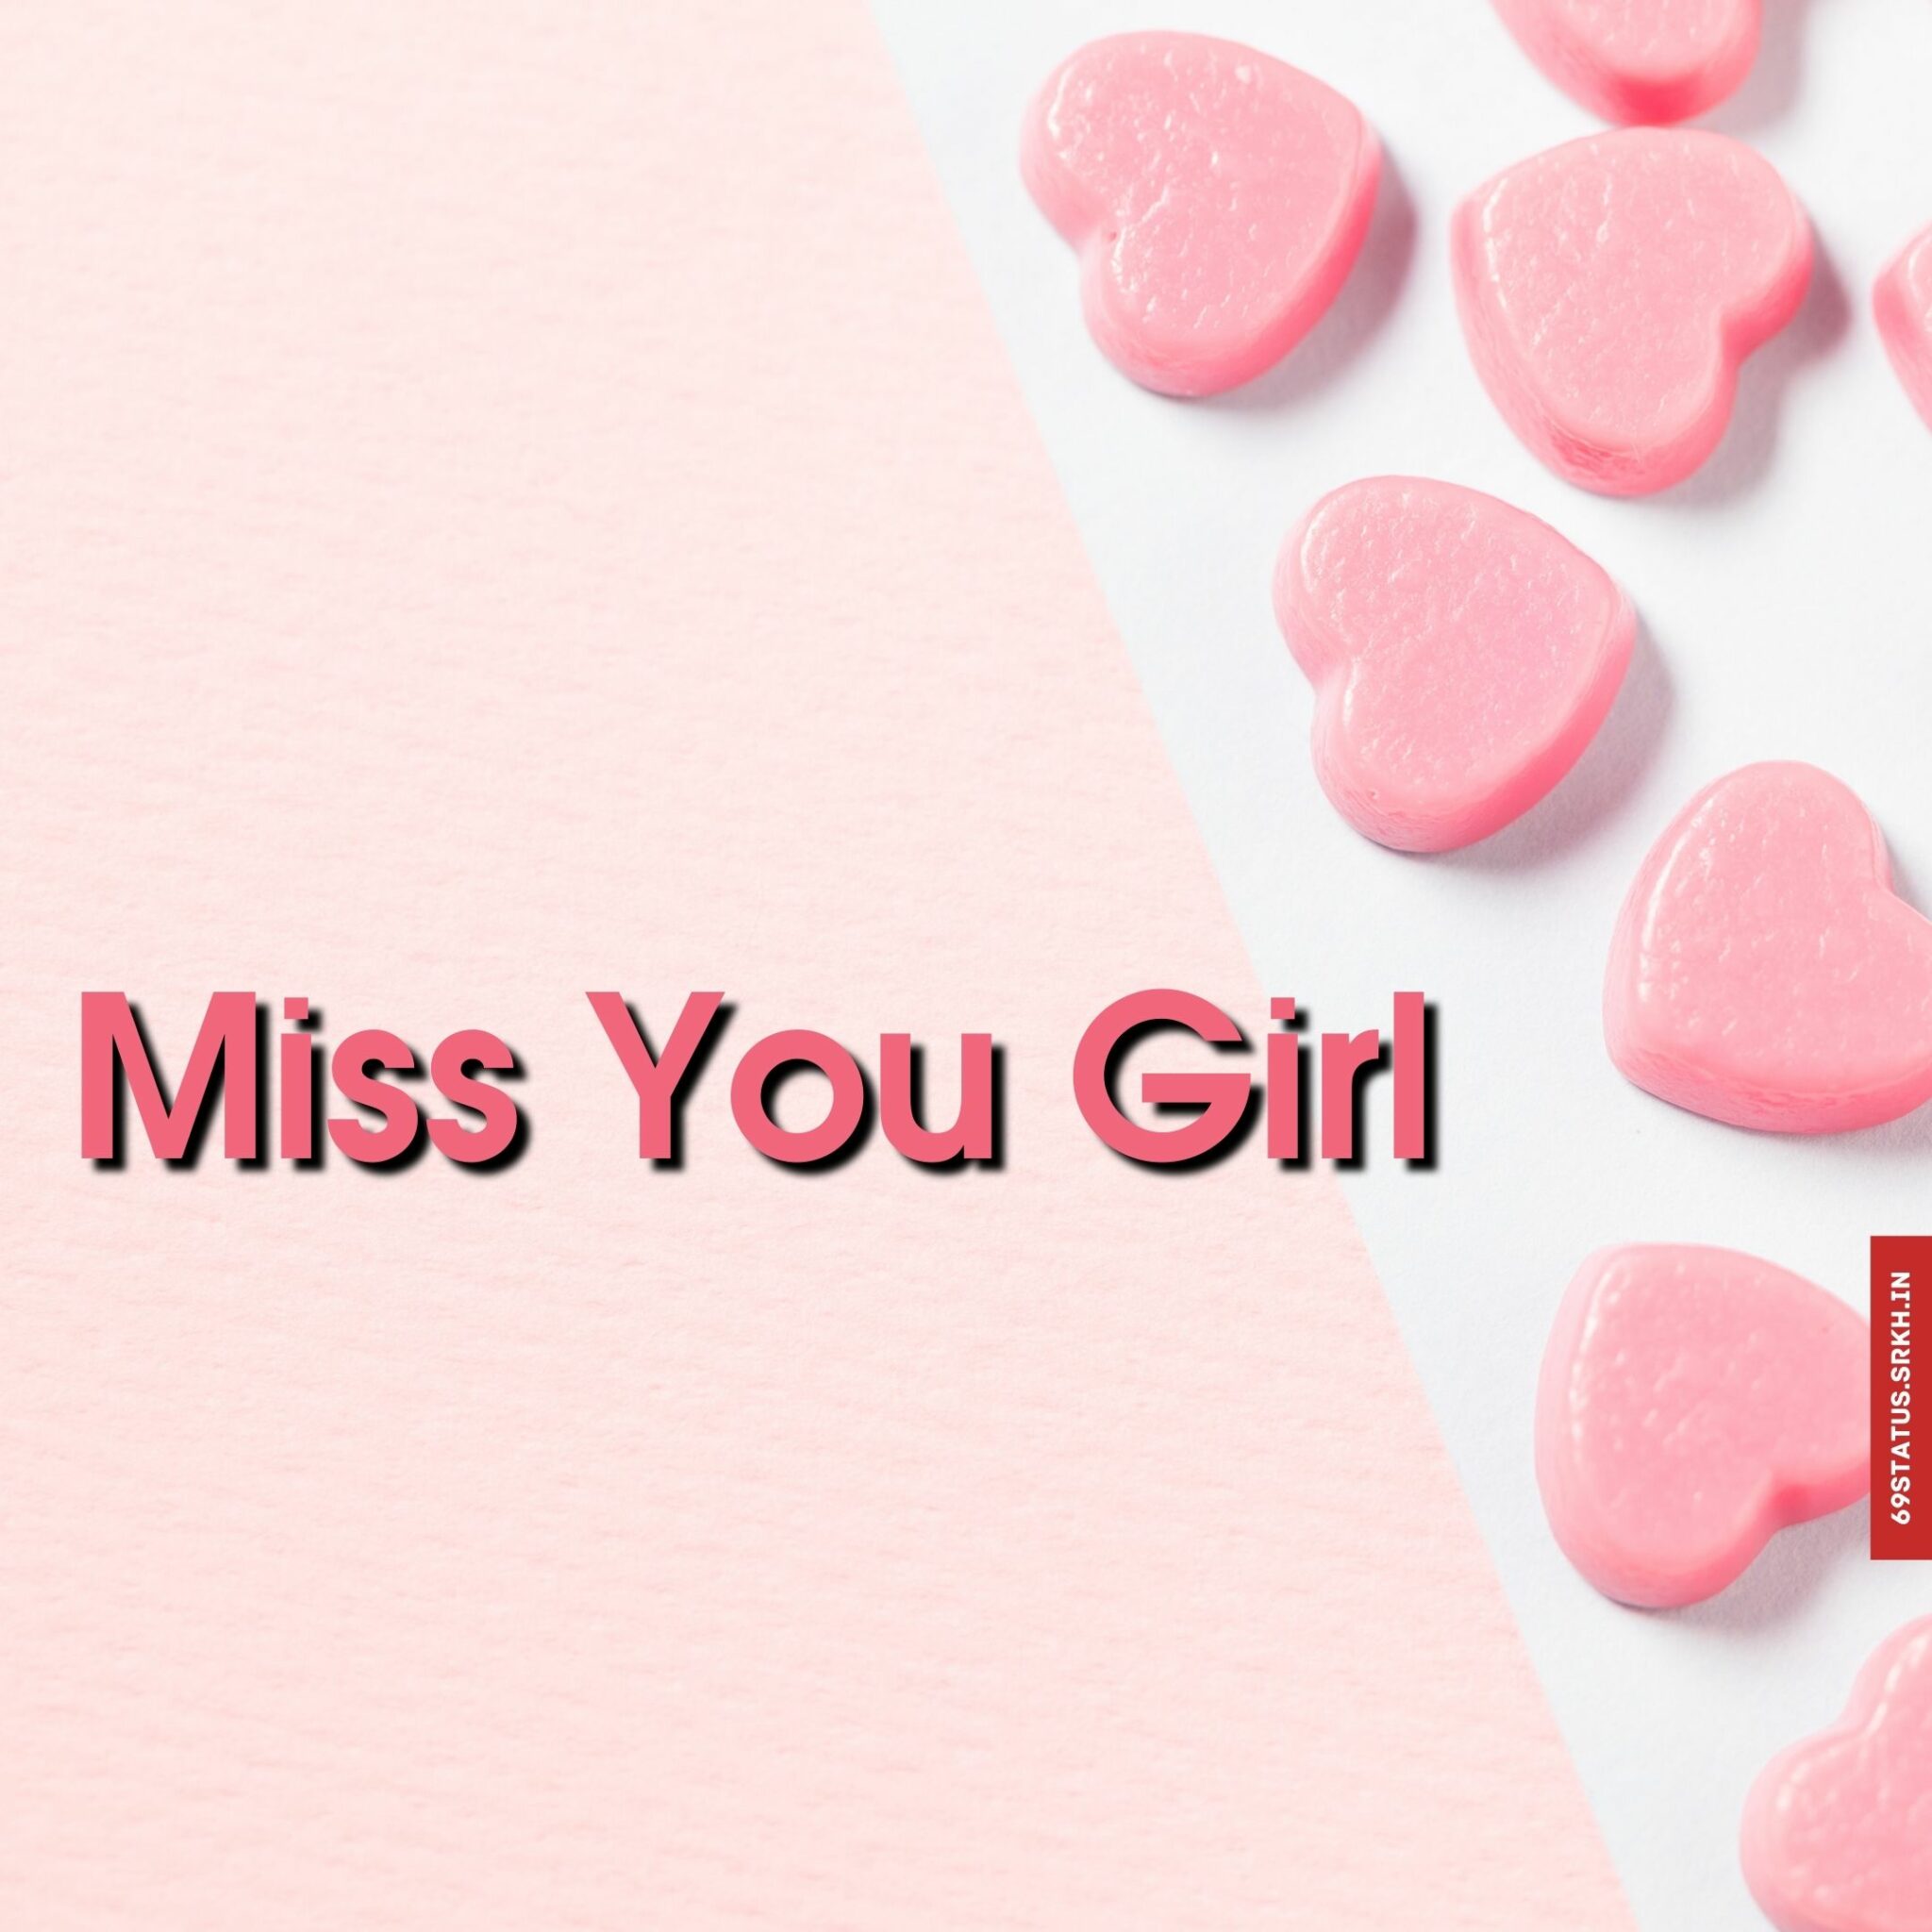 Miss you girl images